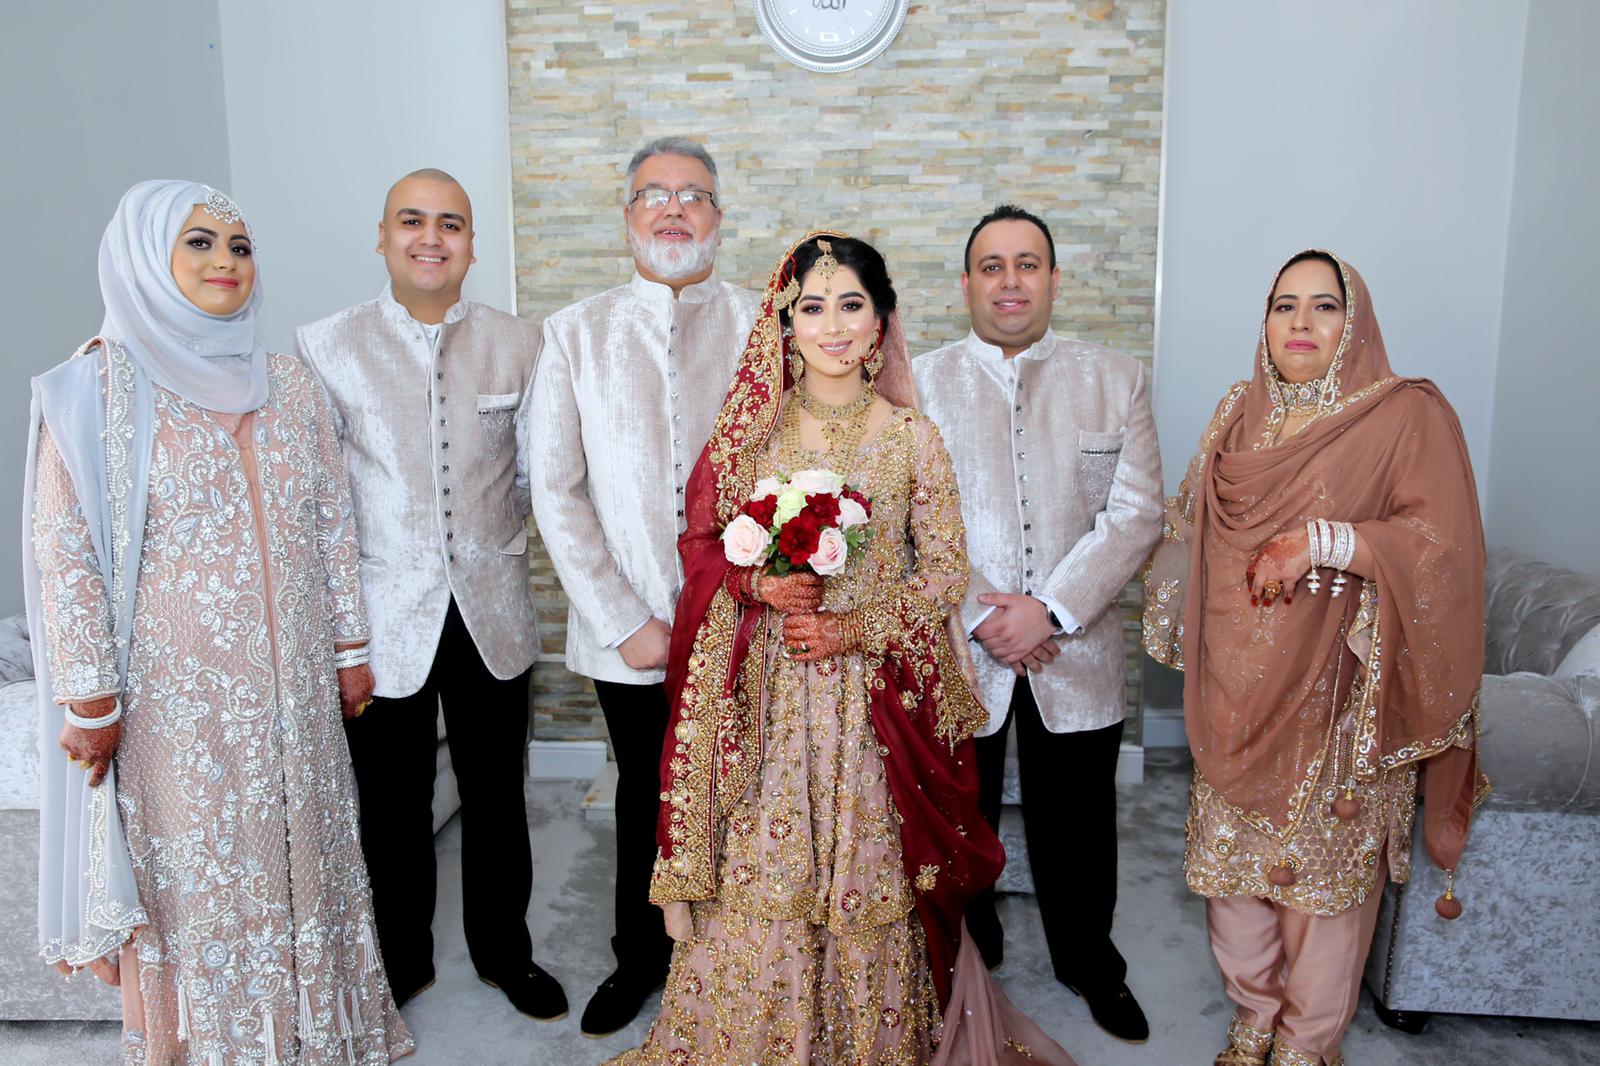 Mohammed Farooq and his son Amar Shazad with their family